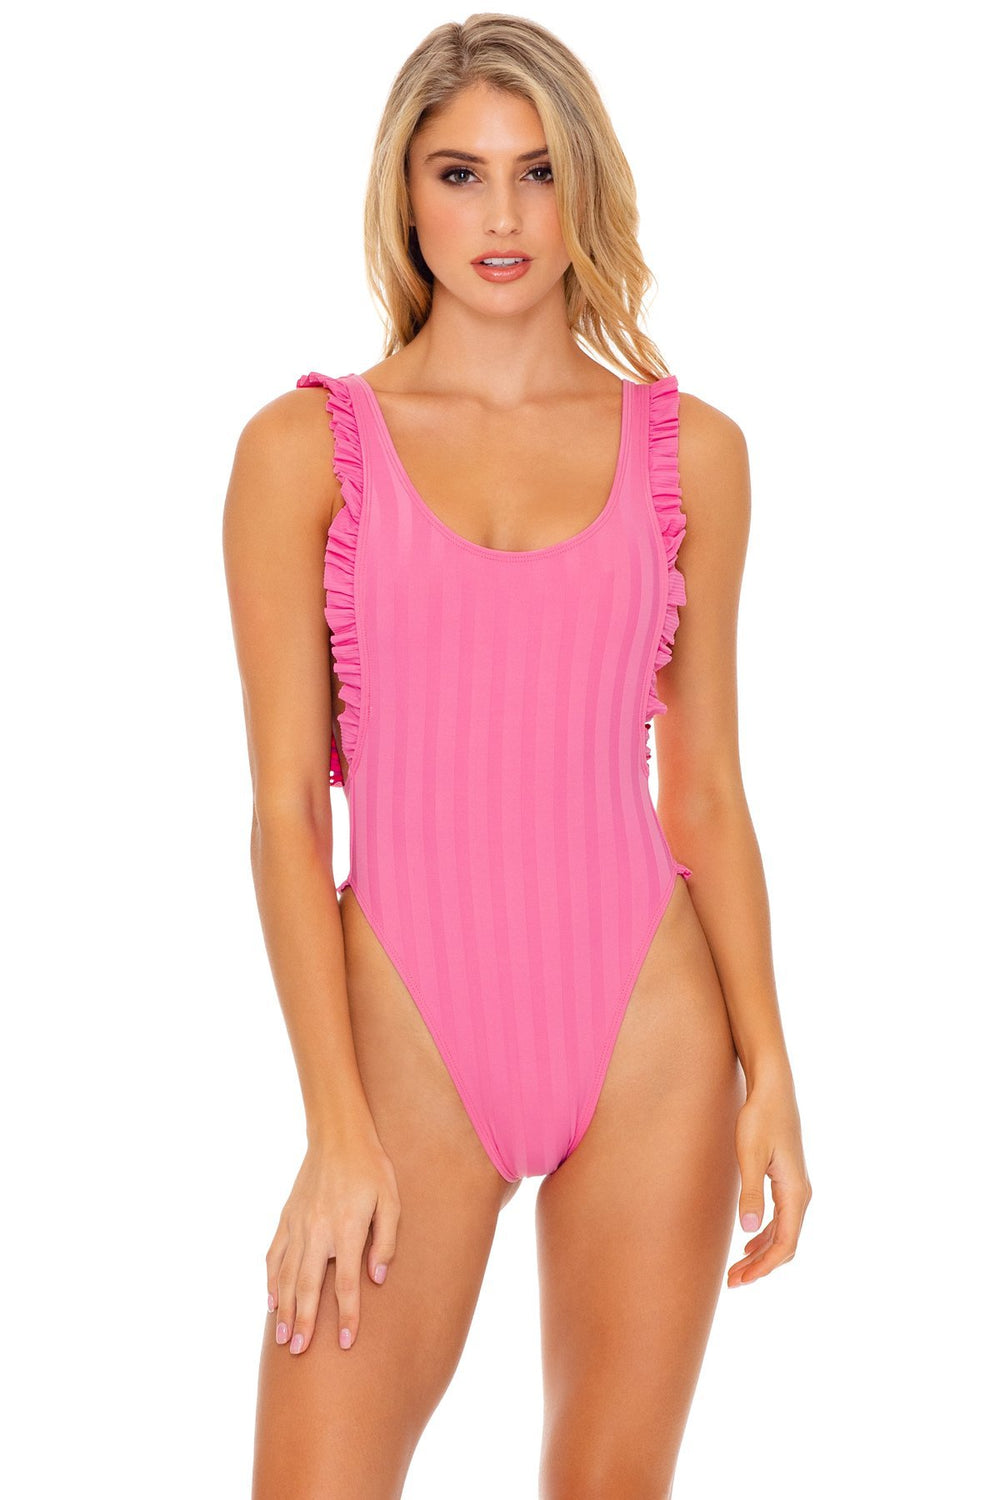 BACHELORETTE AND HER BABES - Tank Open Sides Thong One Piece Bodysuit • Party Pink